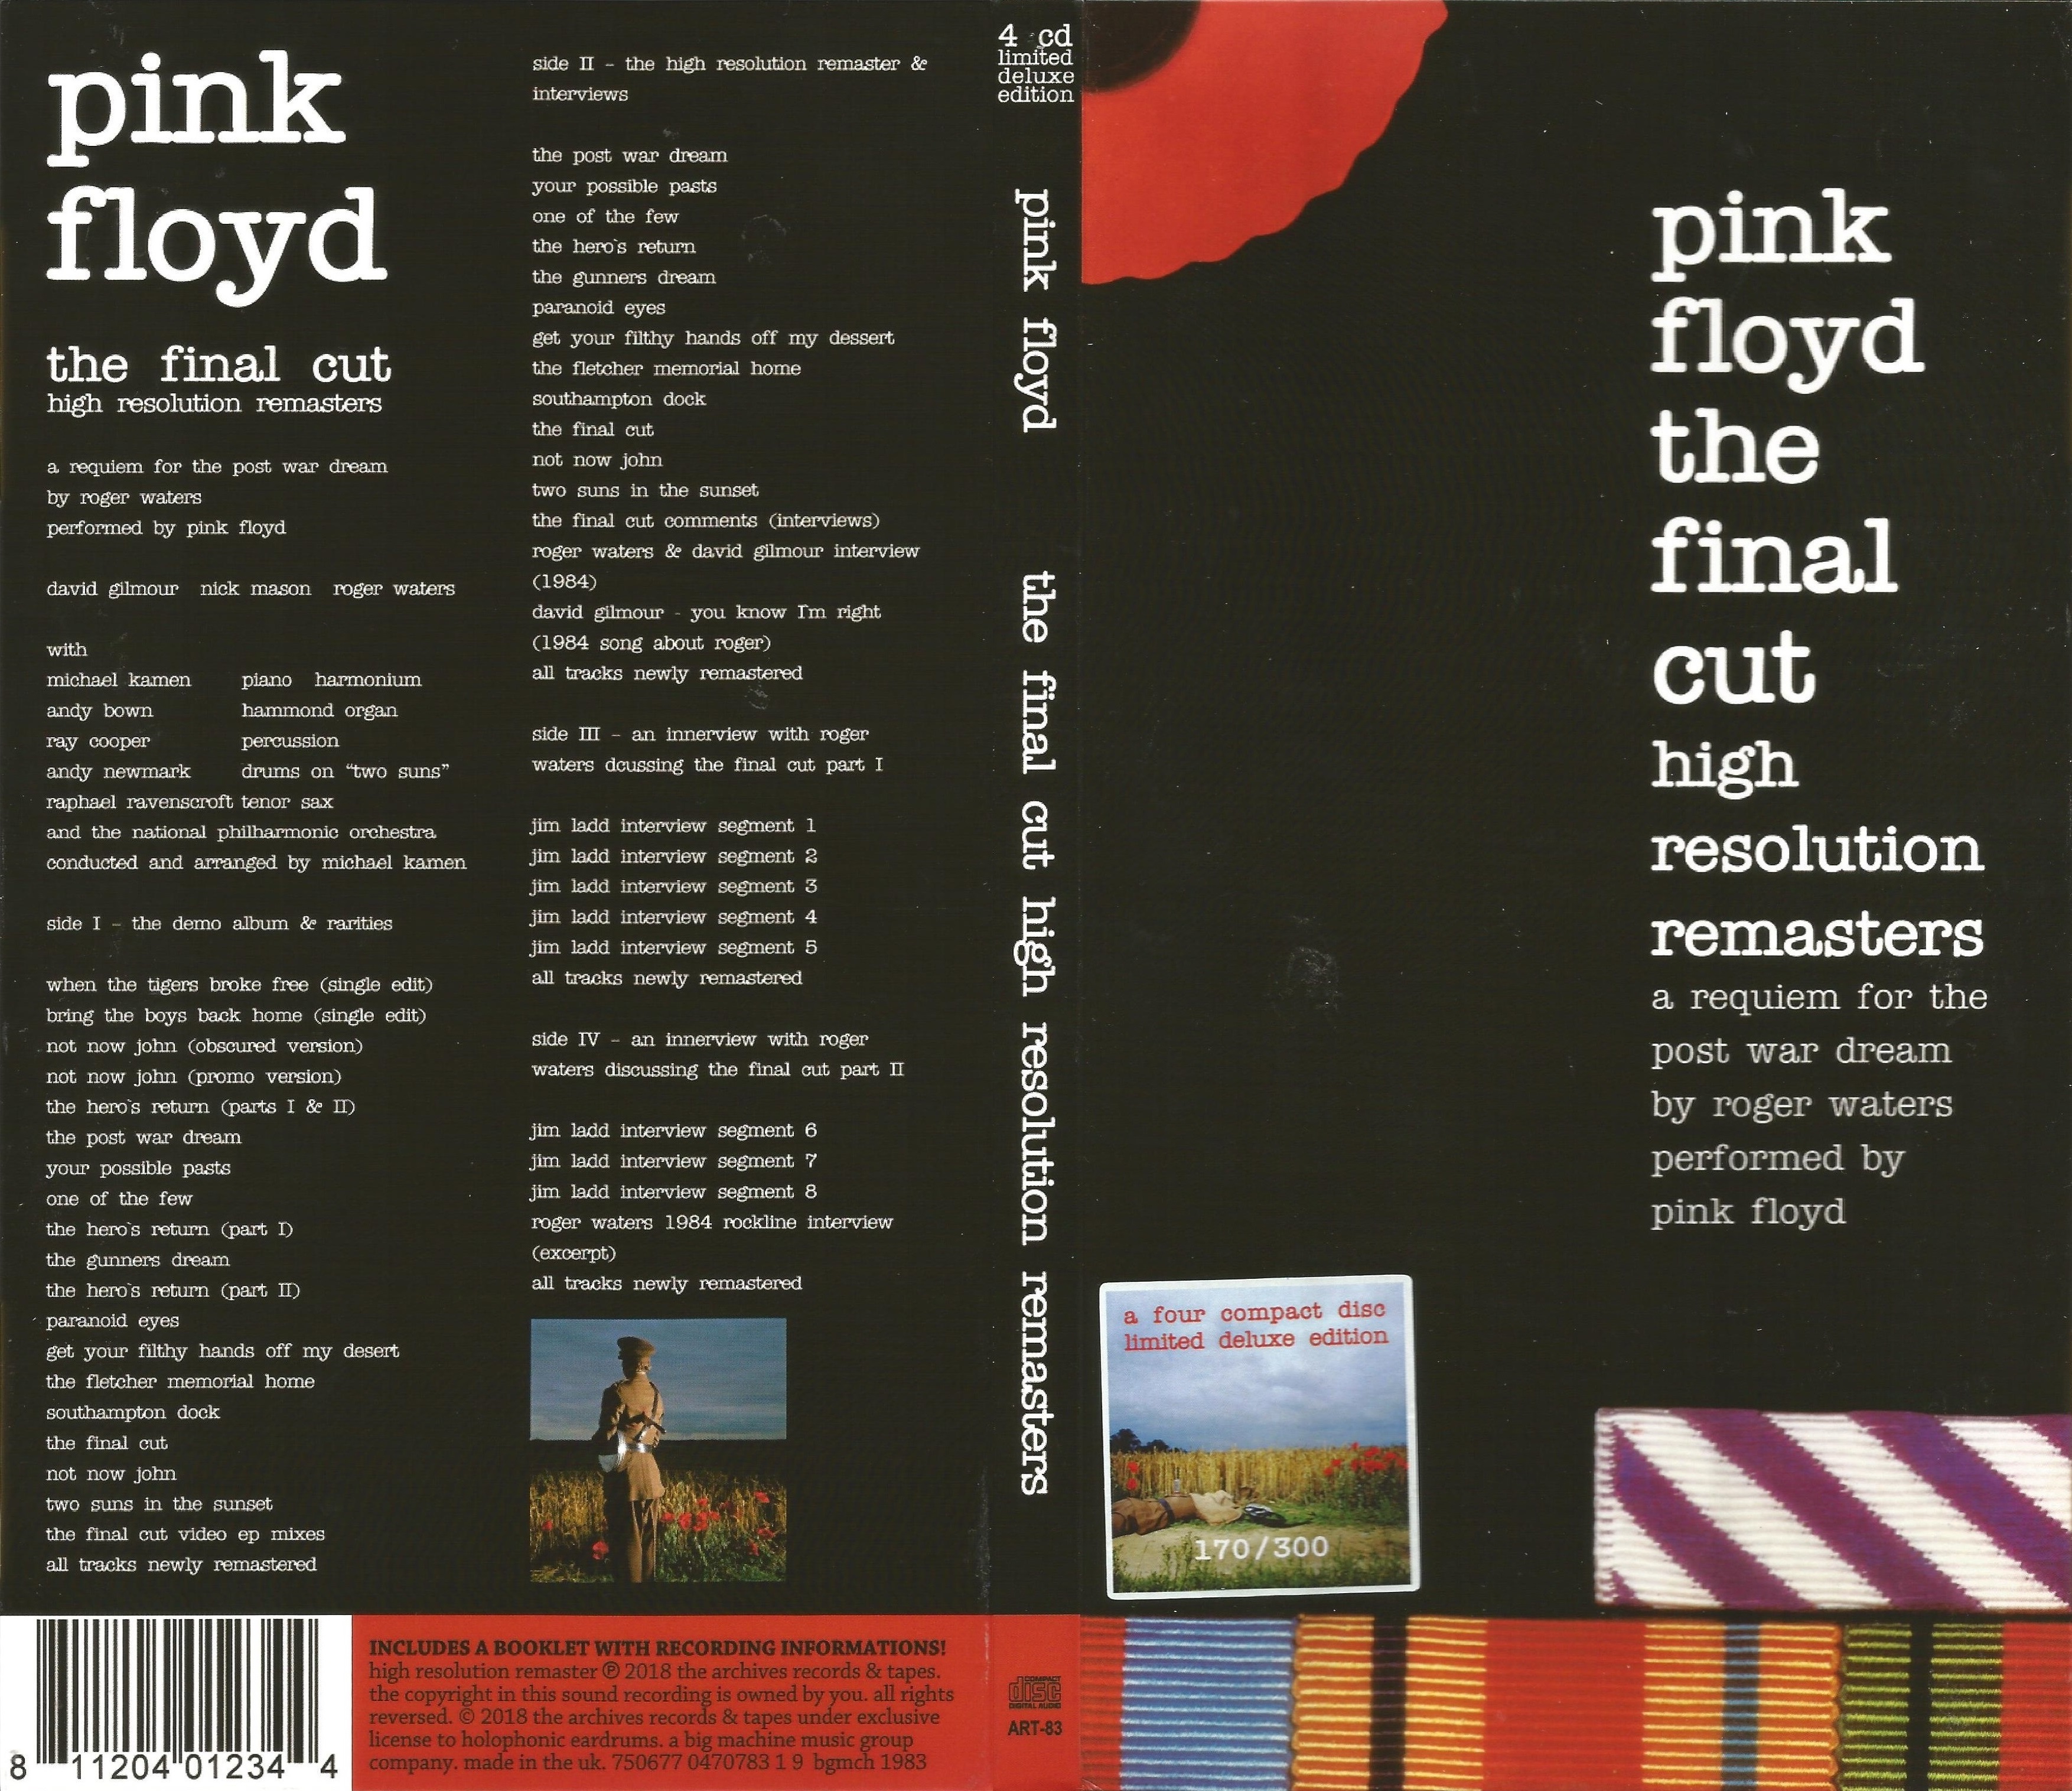 COVERS.BOX.SK ::: Pink Floyd - The Final Cut High Resolution Remasteres  (2018) Box - high quality DVD / Blueray / Movie